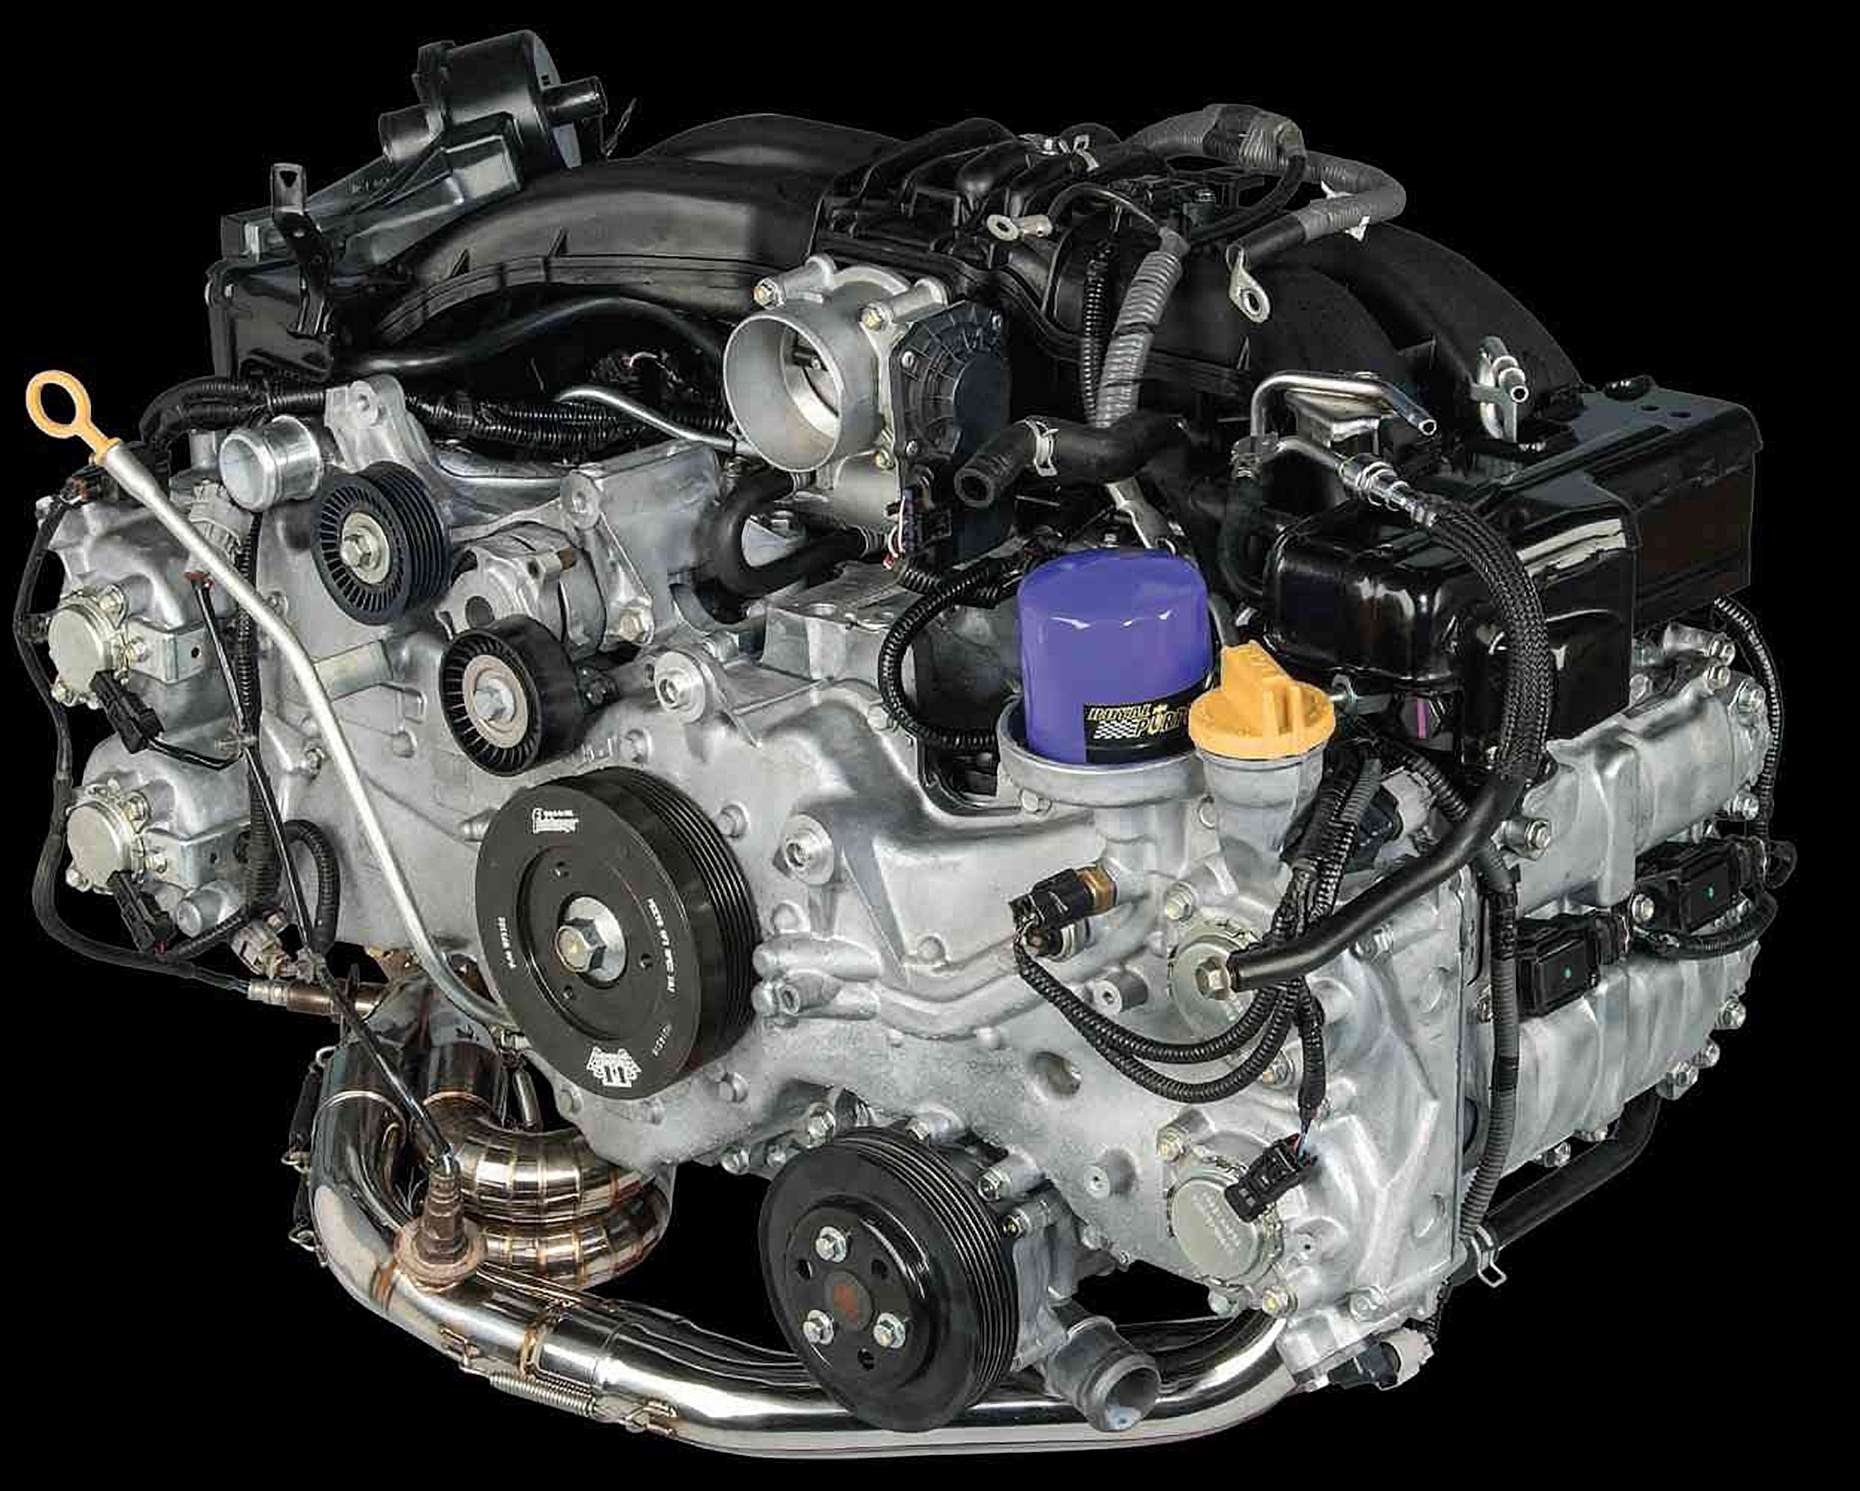 L.A.SLEEVE BRZ Project Engine view